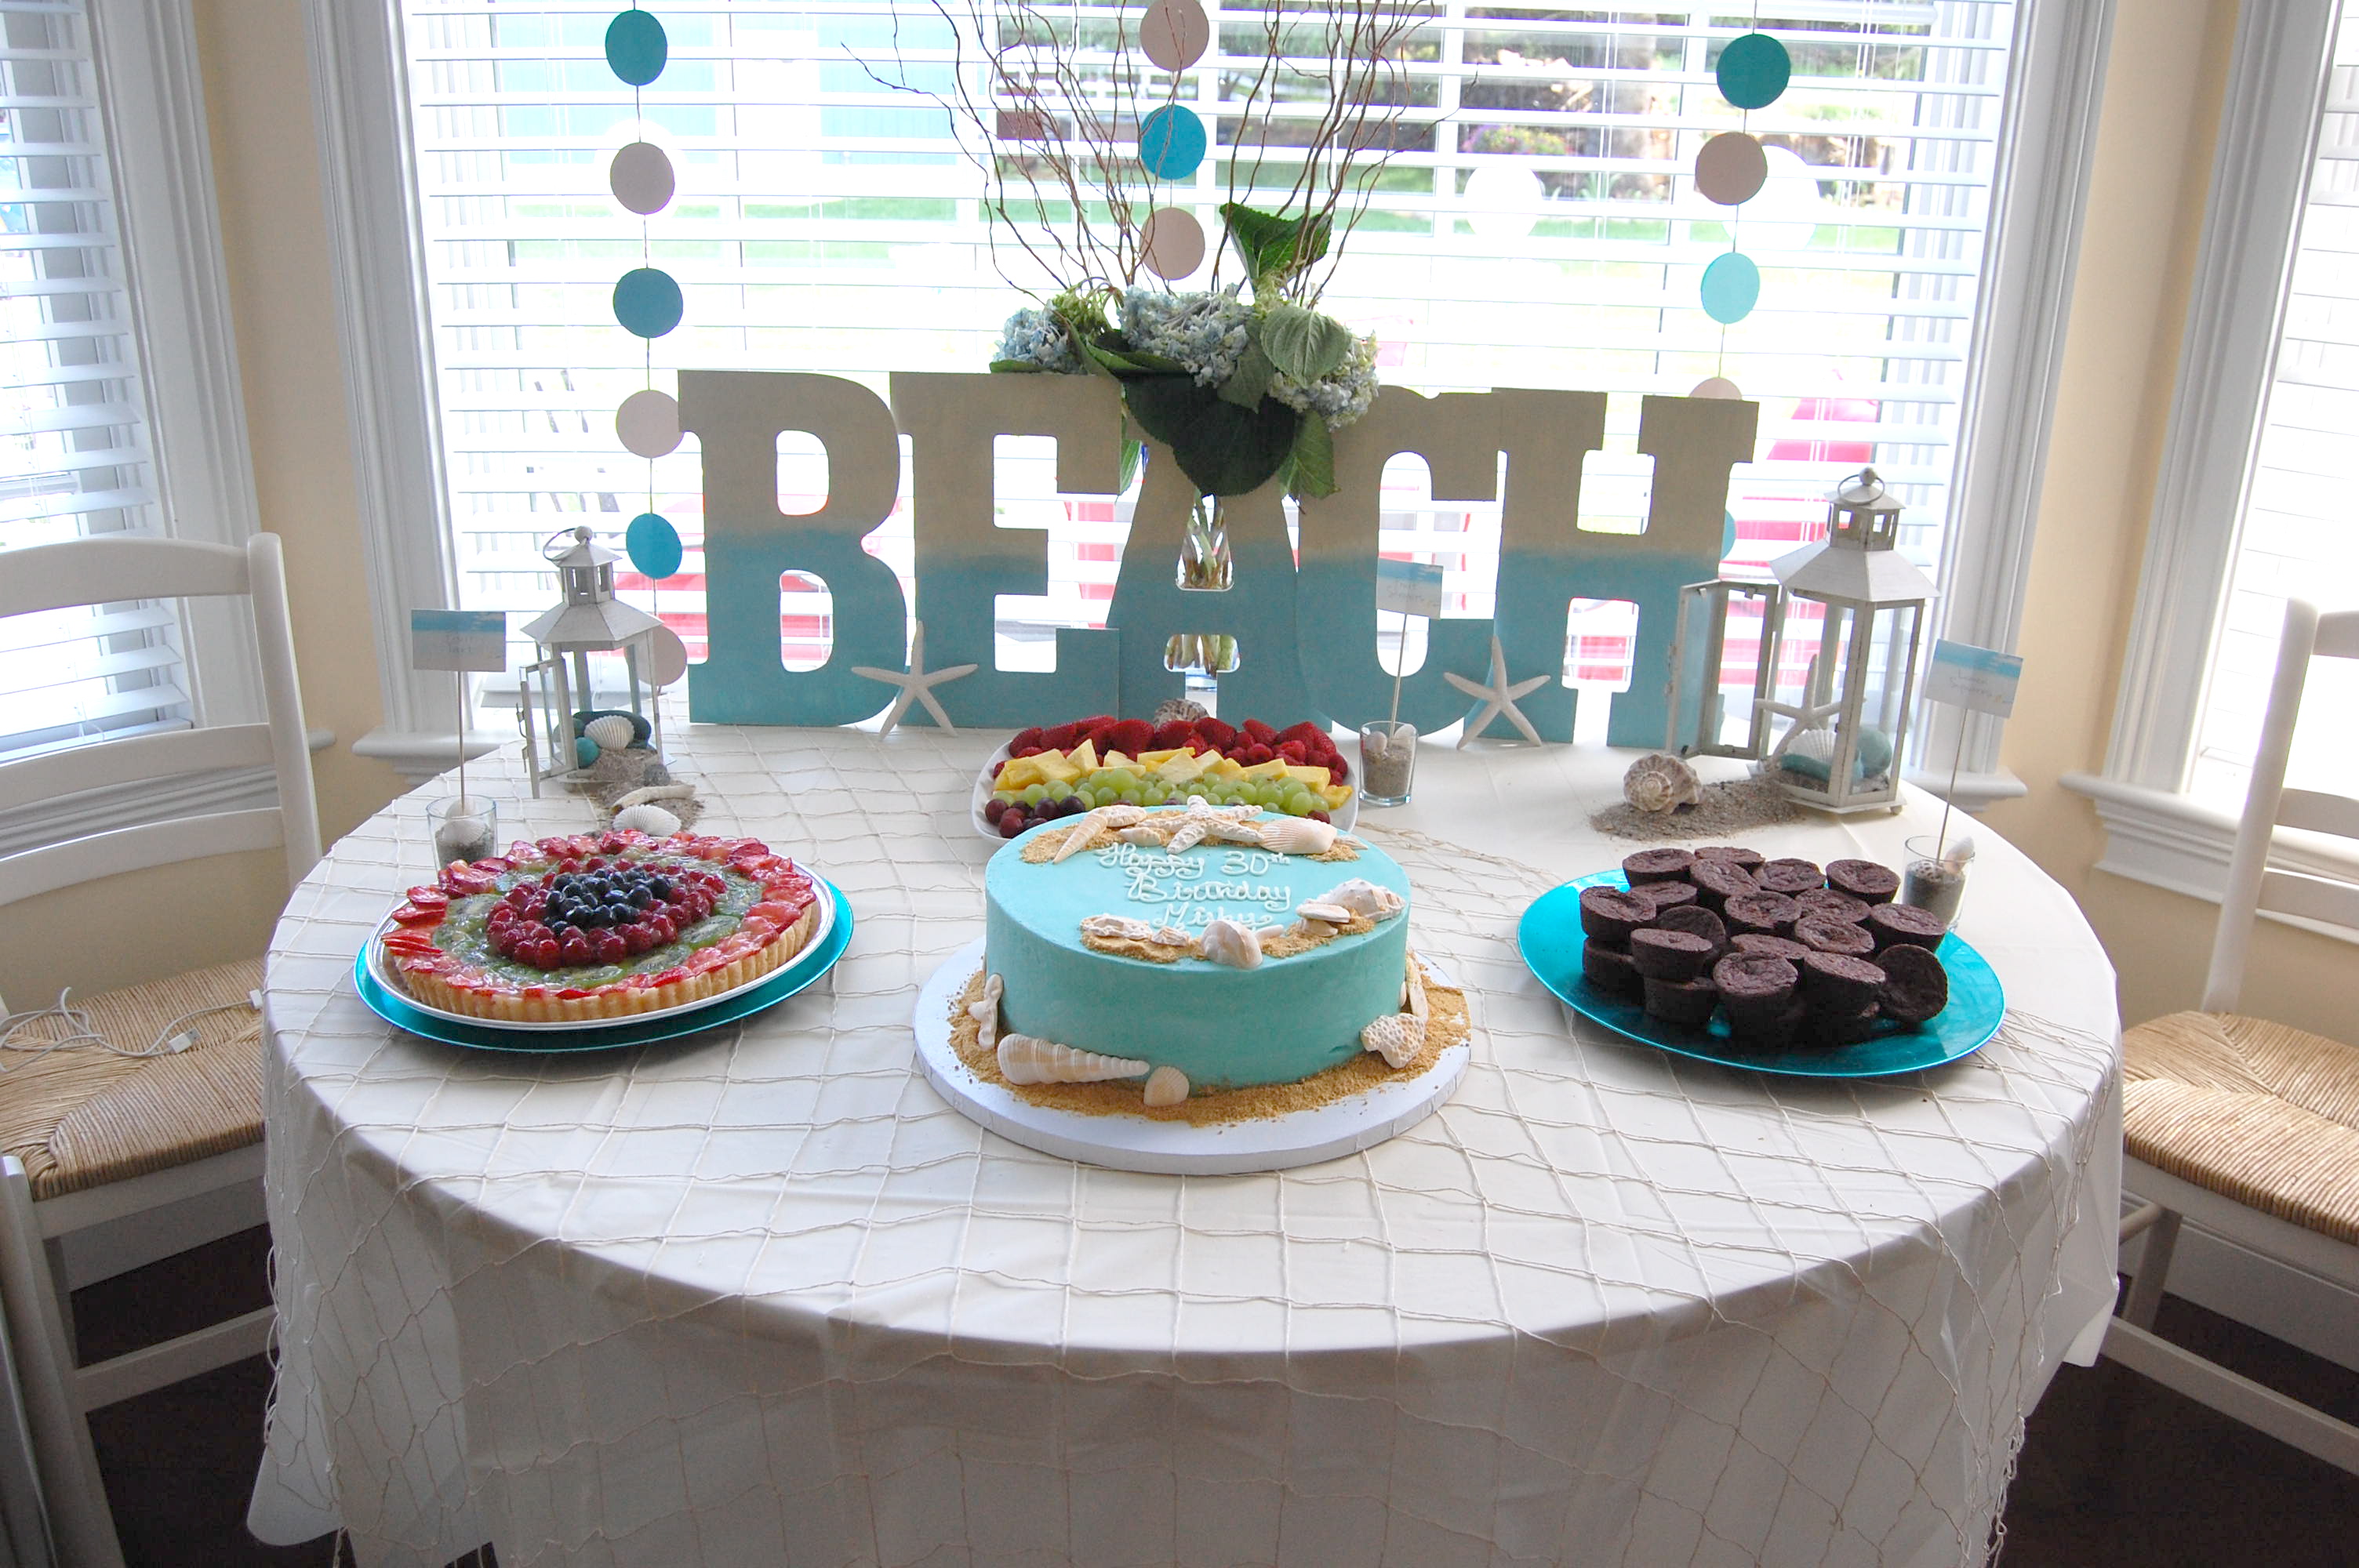 30th birthday home party ideas.